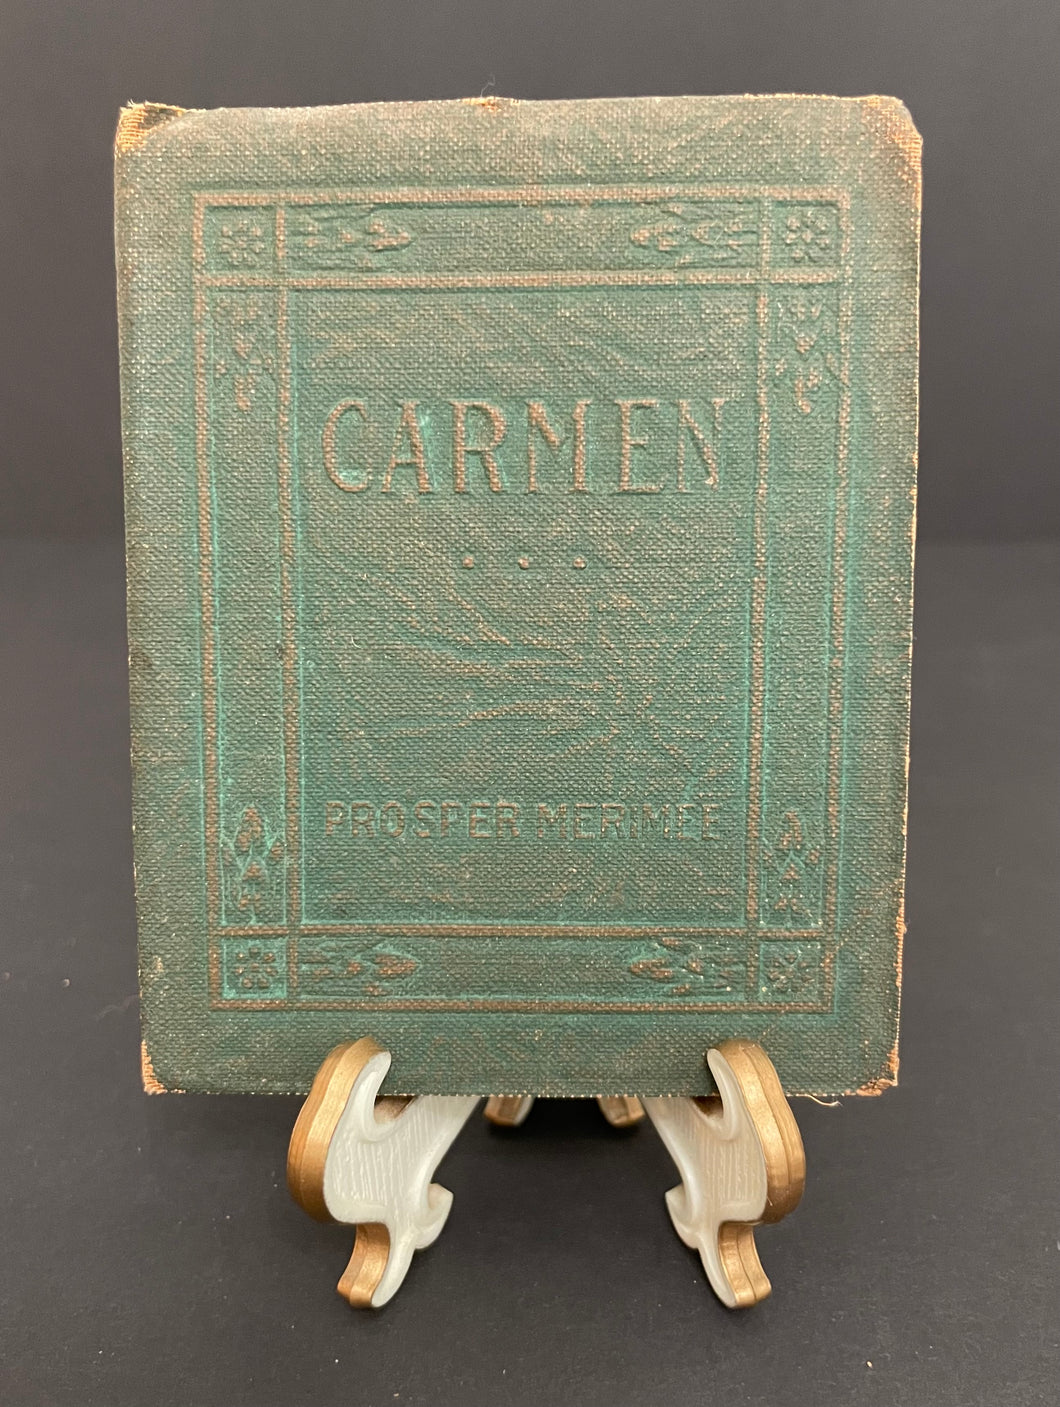 Antique Little Leather Library “Carmen” by Merimee